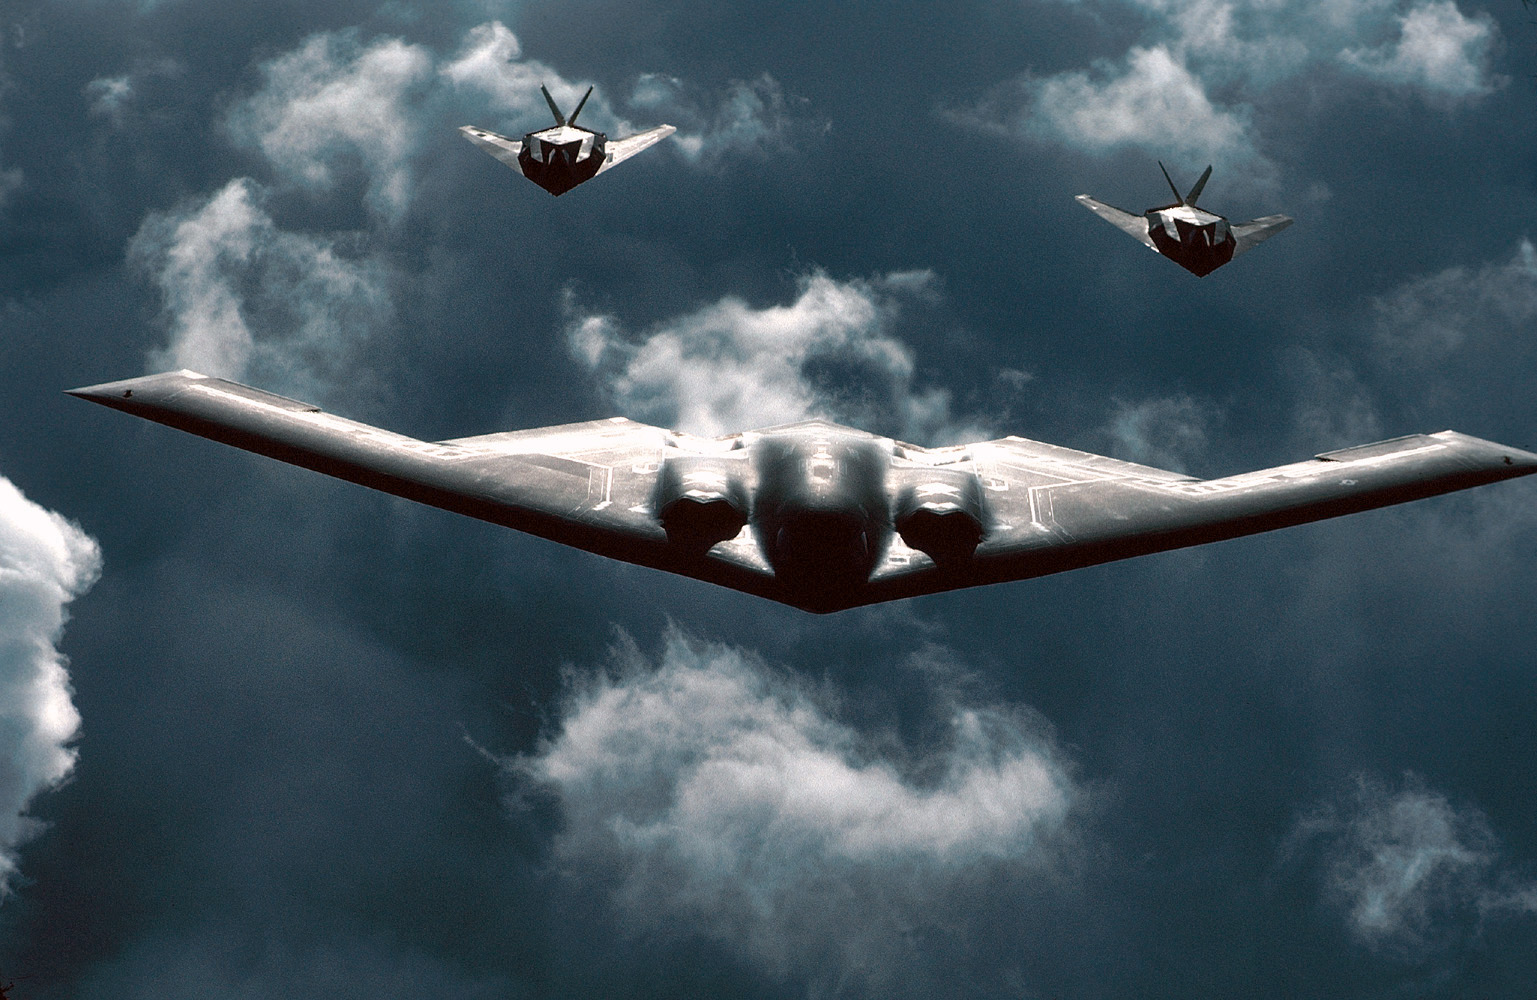 Stealth Bomber B2 Spirit Image Amp Pictures Becuo